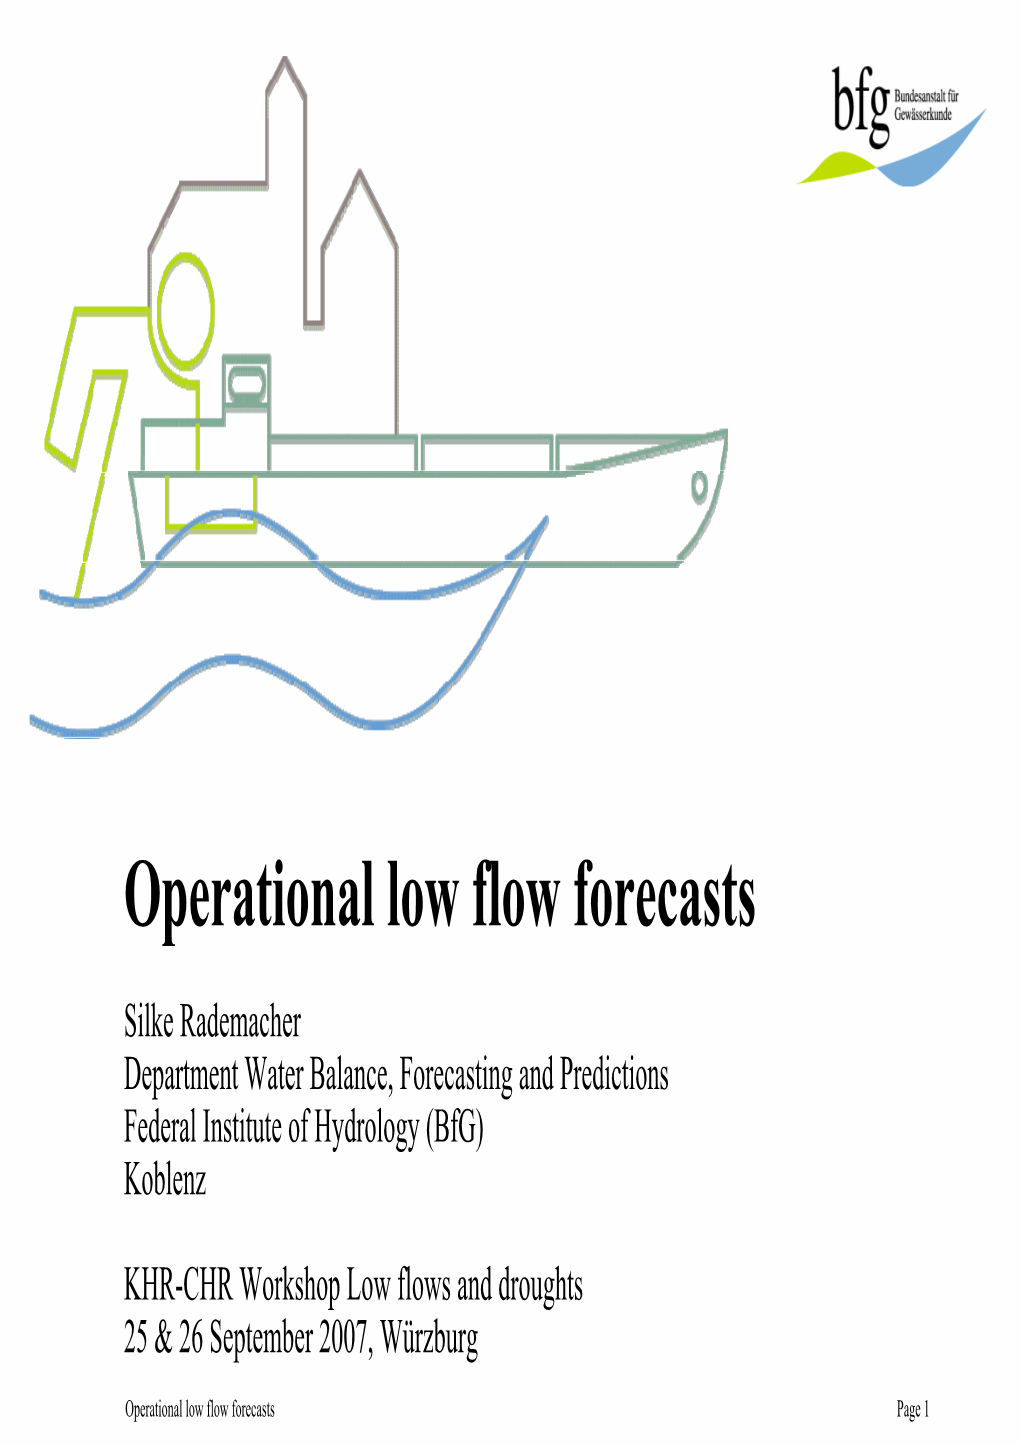 Rademacher Department Water Balance, Forecasting and Predictions Federal Institute of Hydrology (Bfg) Koblenz